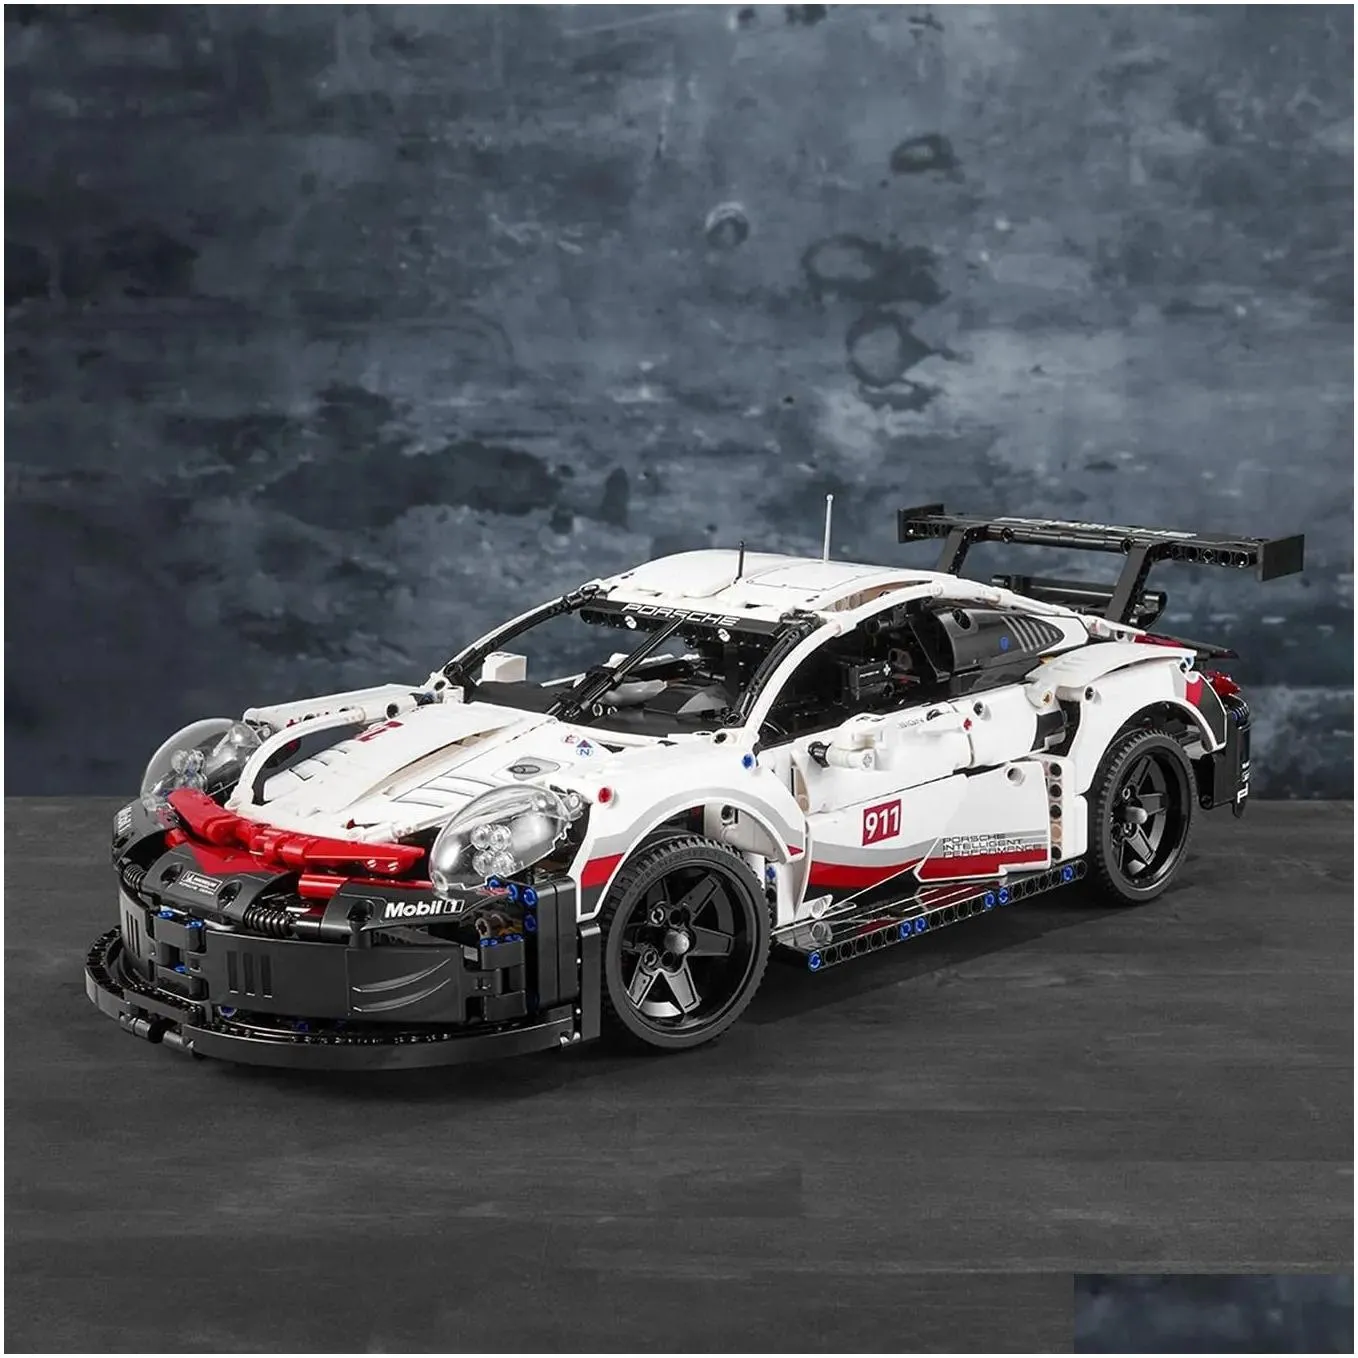 diecast model 911 rsr engineering car compatible 42096 bricks 1580 pieces building kit for adults gifts kids blocks construction toys